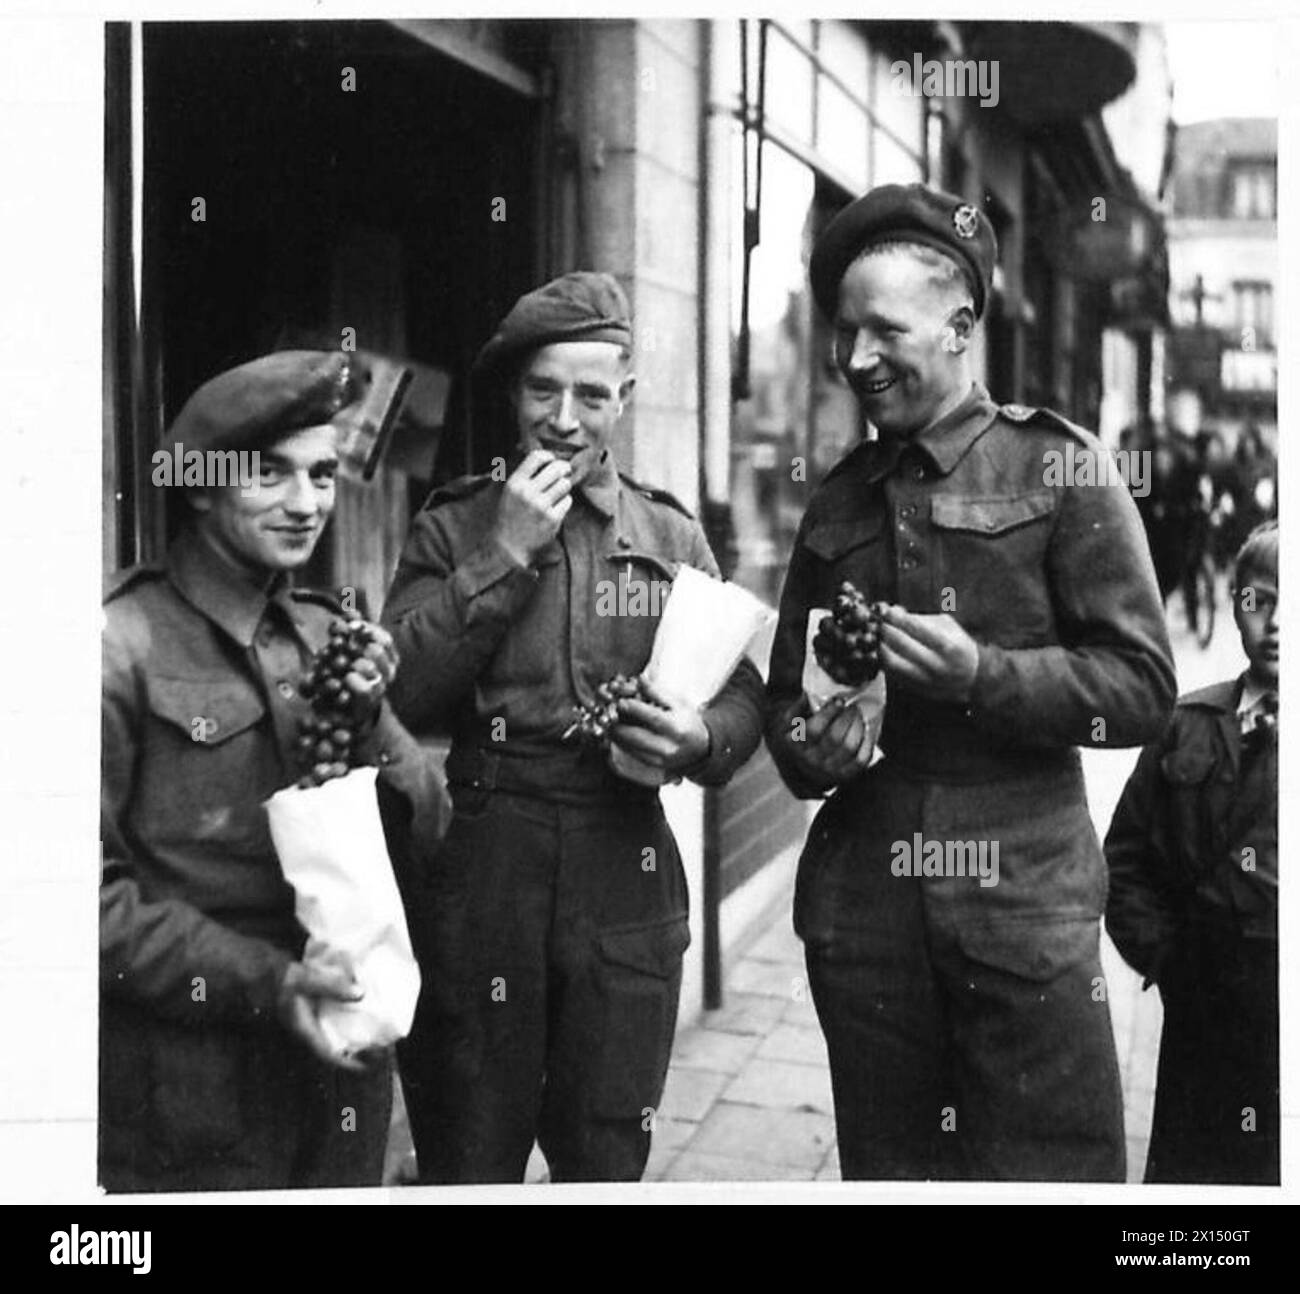 LIFE IN LIBERATED BELGIUM - L-R: Pte Dyke, G. of Hitchin; Pte Hendrick, W of Worthing and Pte. Bant, J of Smethwick, Birmingham, all of the 2nd Essex Regt., enjoy grapes which are so cheap and plentiful over here, whilst resting from front line duty British Army, 21st Army Group Stock Photo